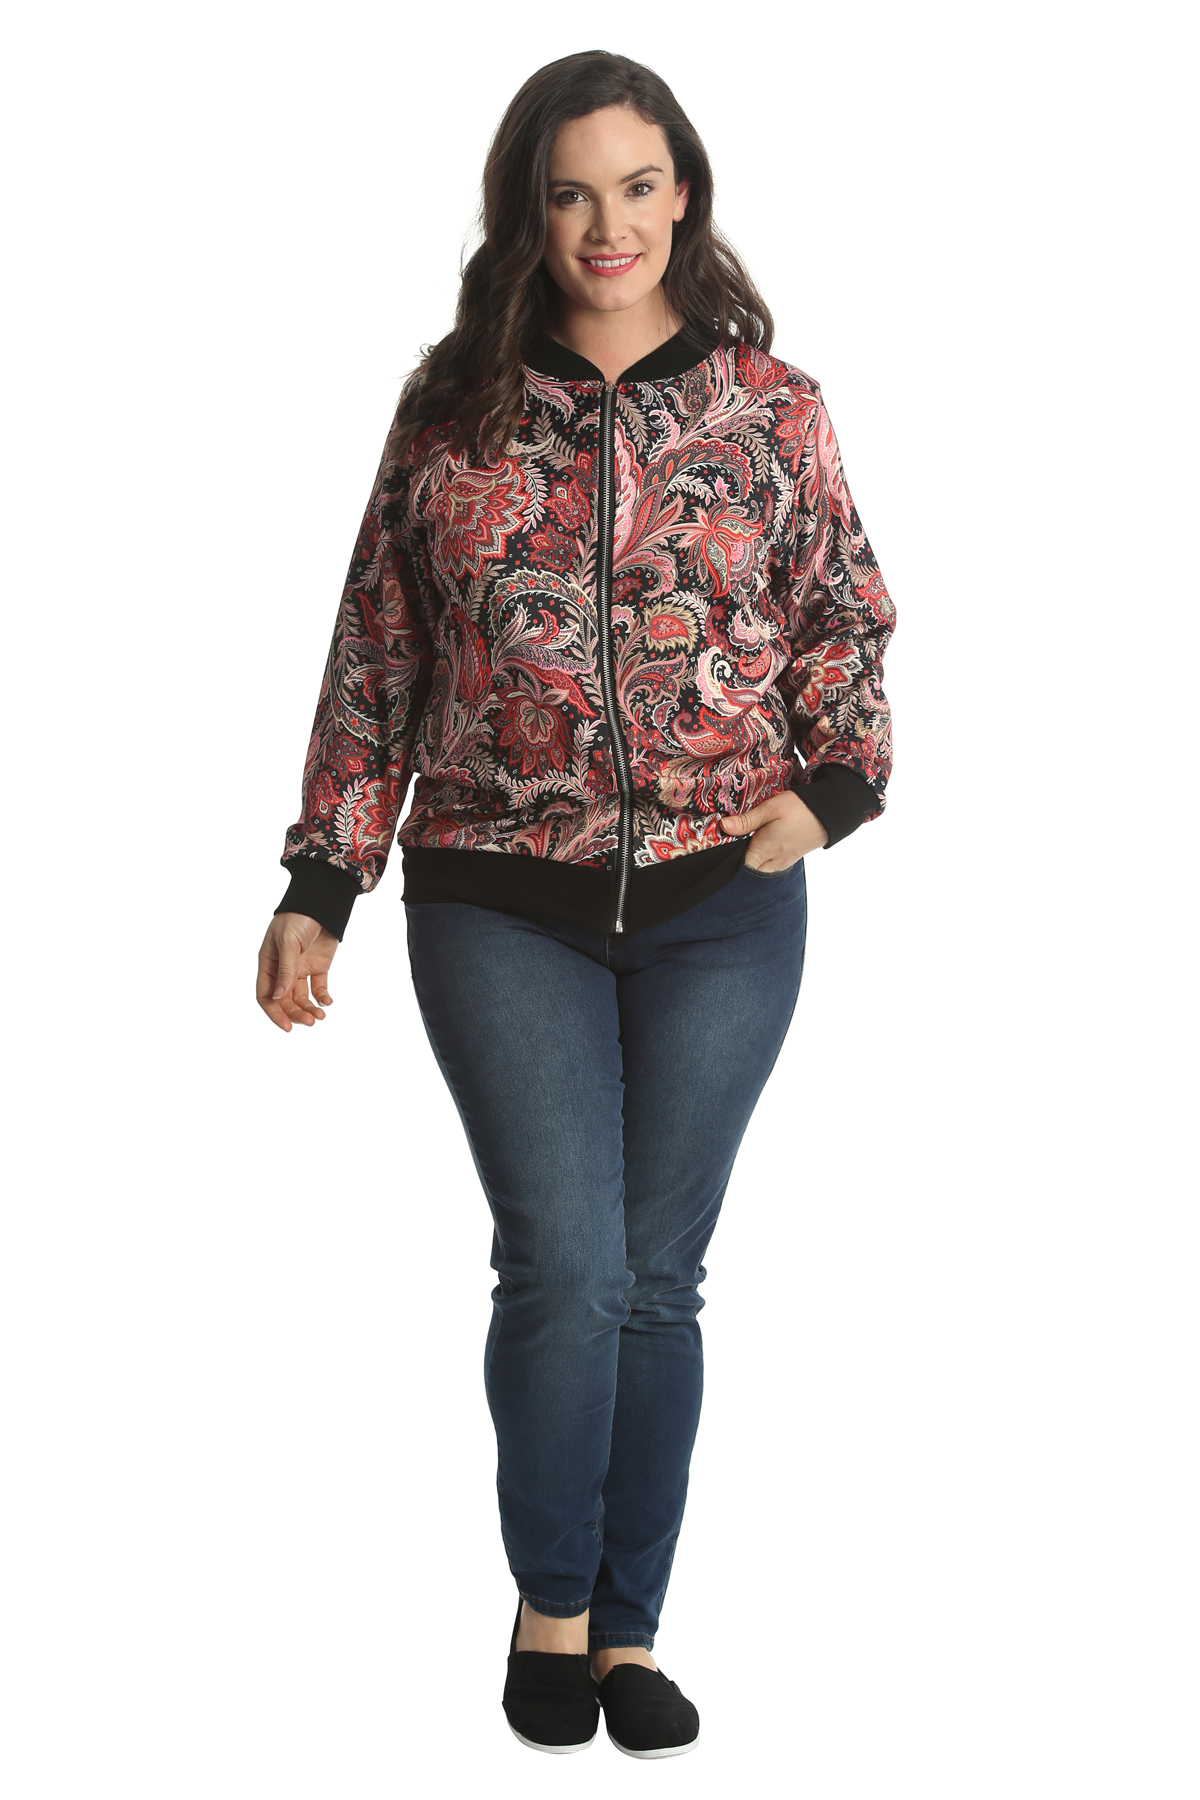 New Ladies Plus Size Bomber Jacket Womens Paisley Floral Print Ribbed ...